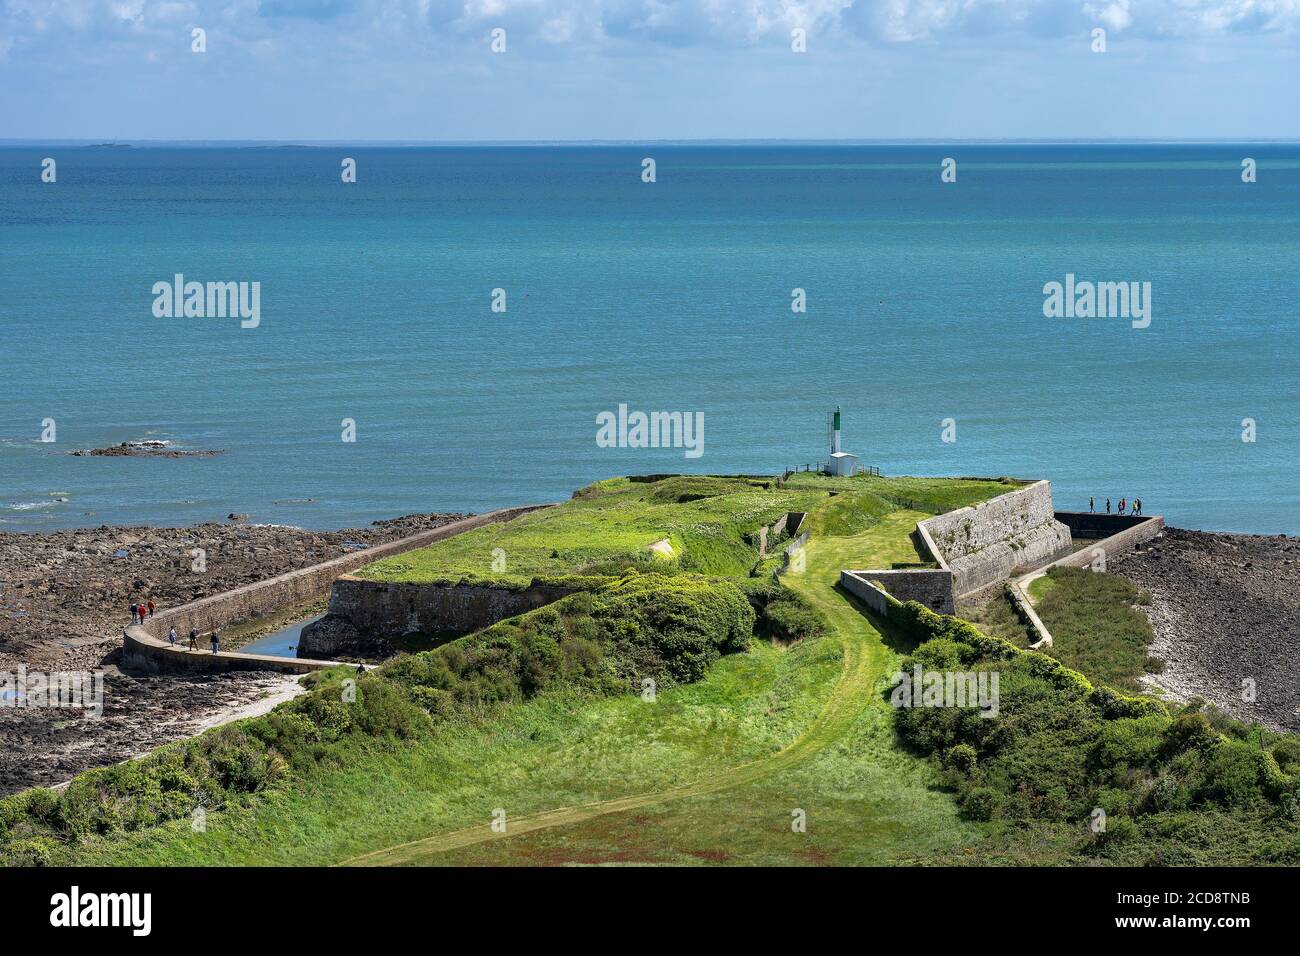 France, Manche, Saint-Vaast la Hougue, the Hougue fortress built by Vauban, listed as World Heritage by UNESCO Stock Photo